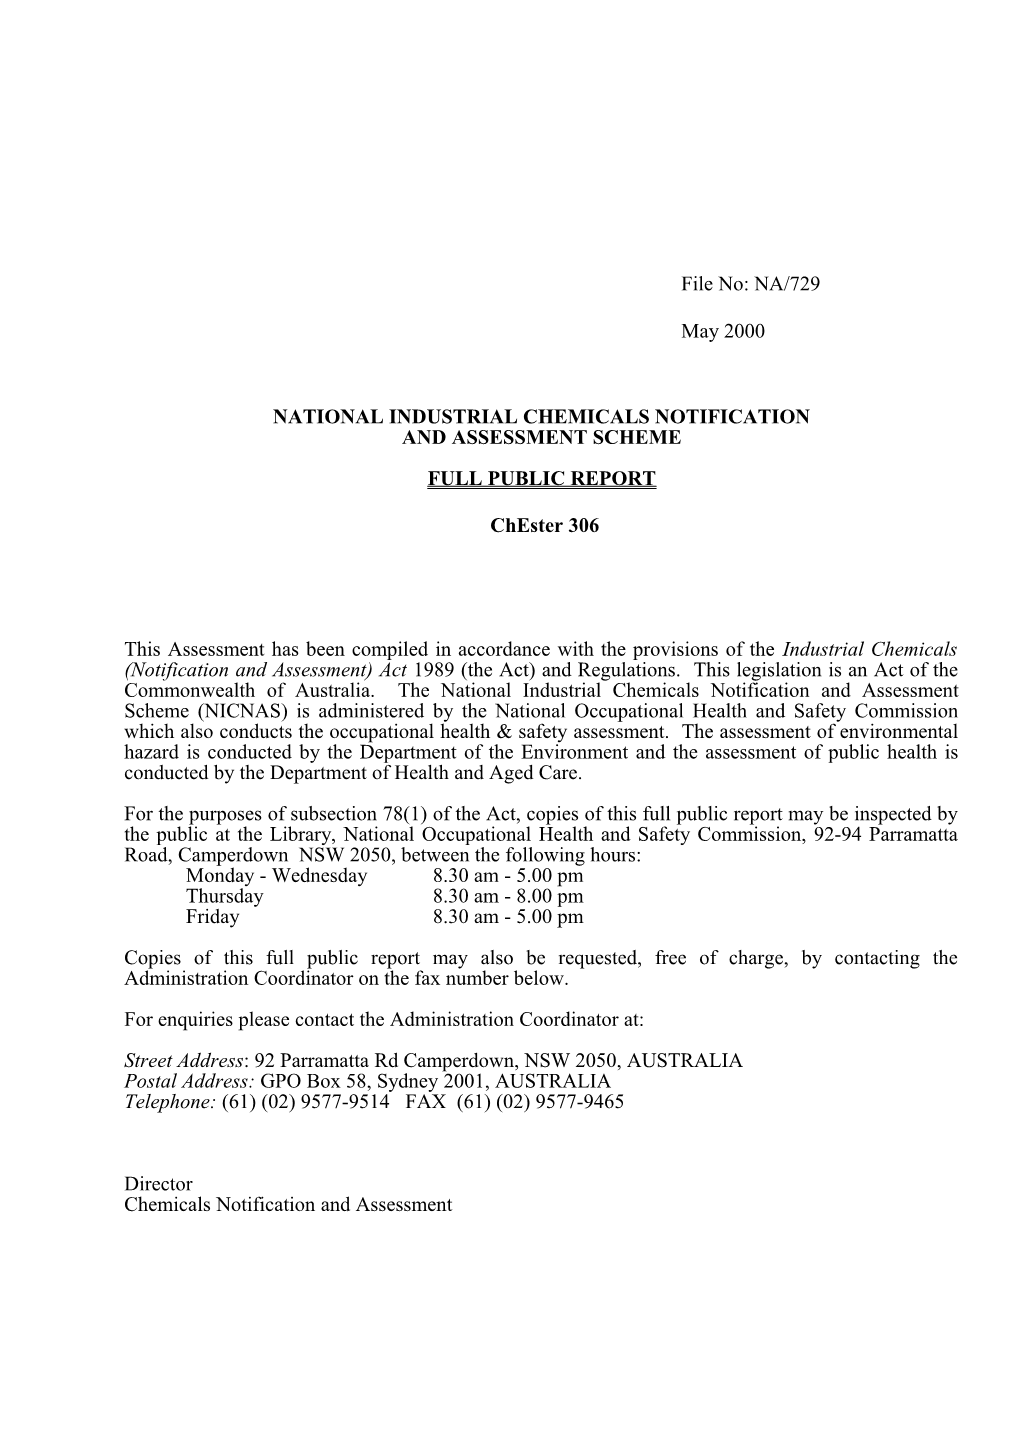 National Industrial Chemicals Notification s8